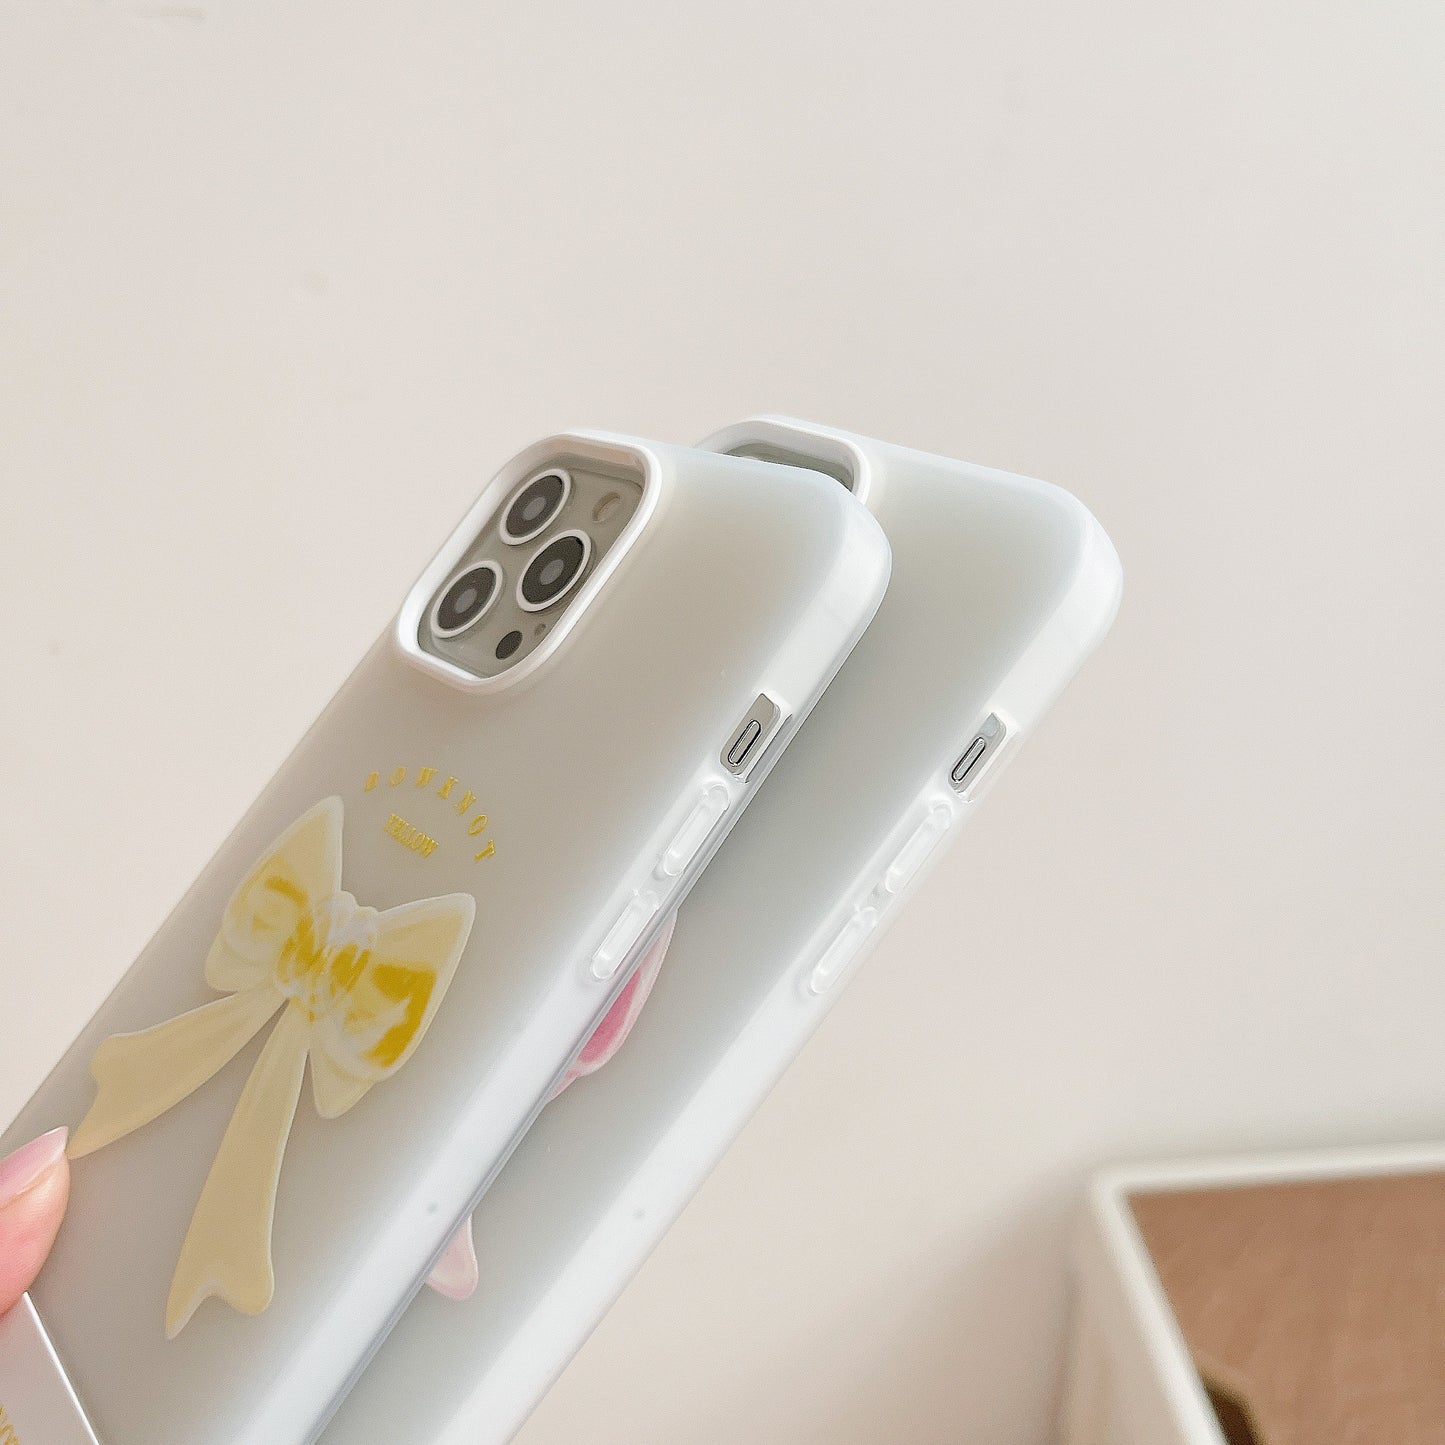 iPhone case,Pearlescent bow.